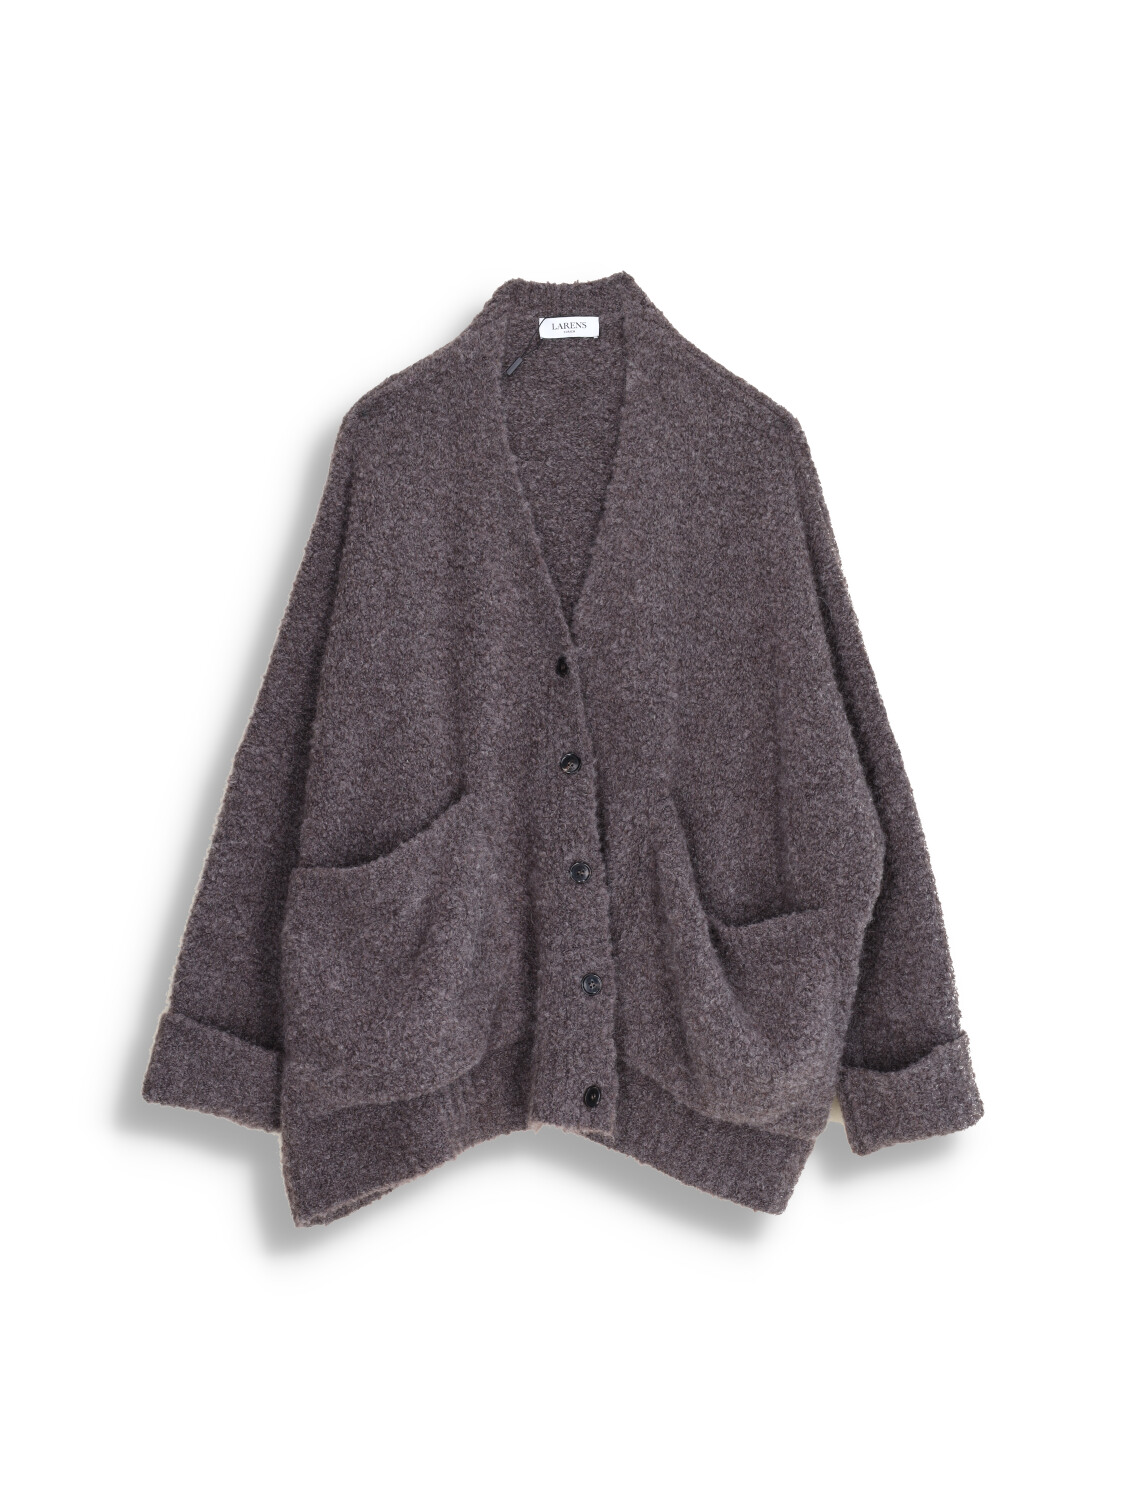 Oversized cardigan with pockets made of cashmere and alpaca